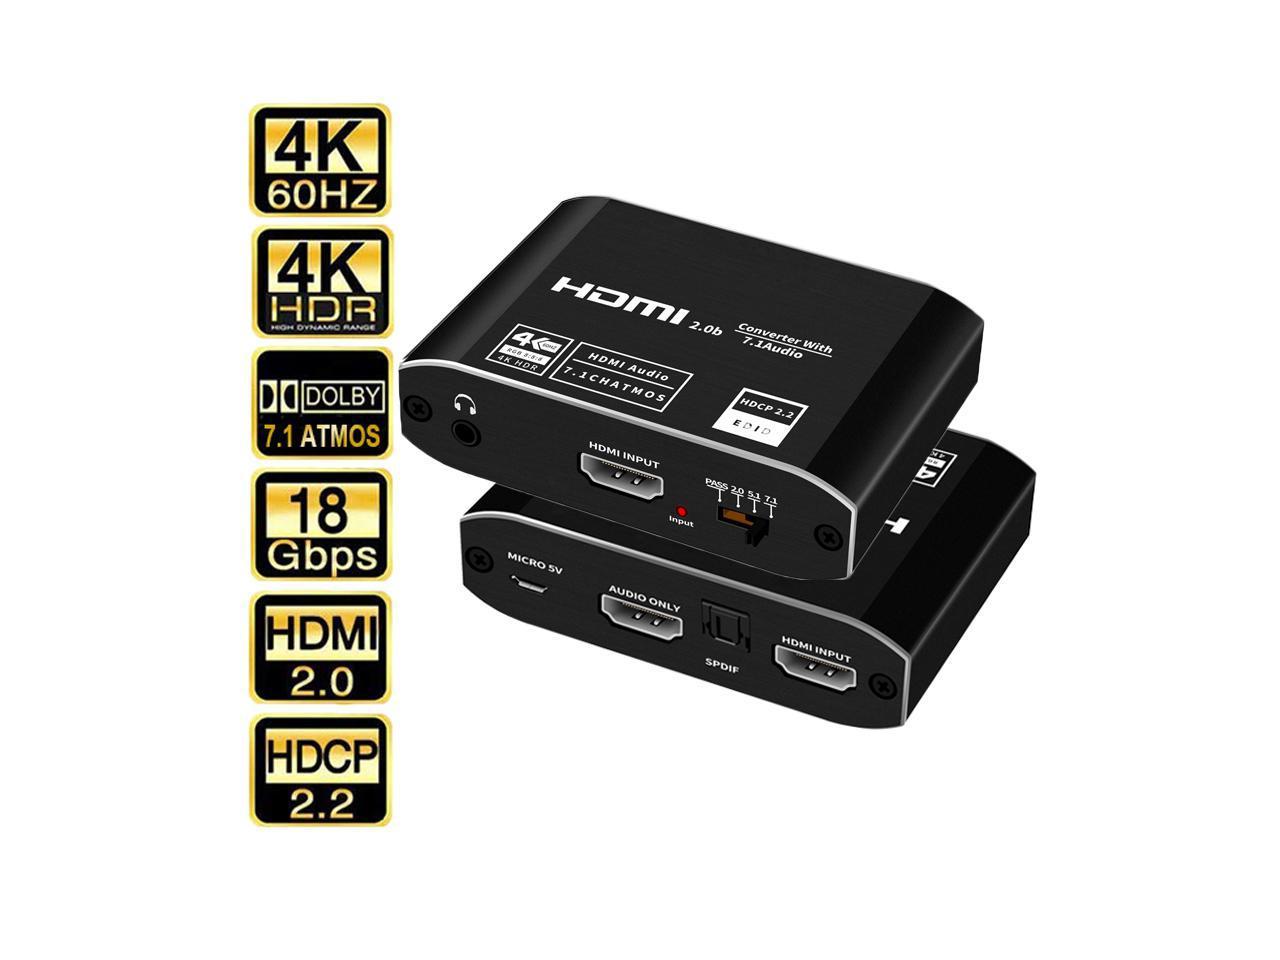 4K@60Hz HDMI Audio Extractor Splitter, HDMI to HDMI + Optical Toslink SPDIF + Audio + 7.1Ch HDMI Audio for PS4 Xbox One DVD Blu-ray Player TV Projector - Newegg.com